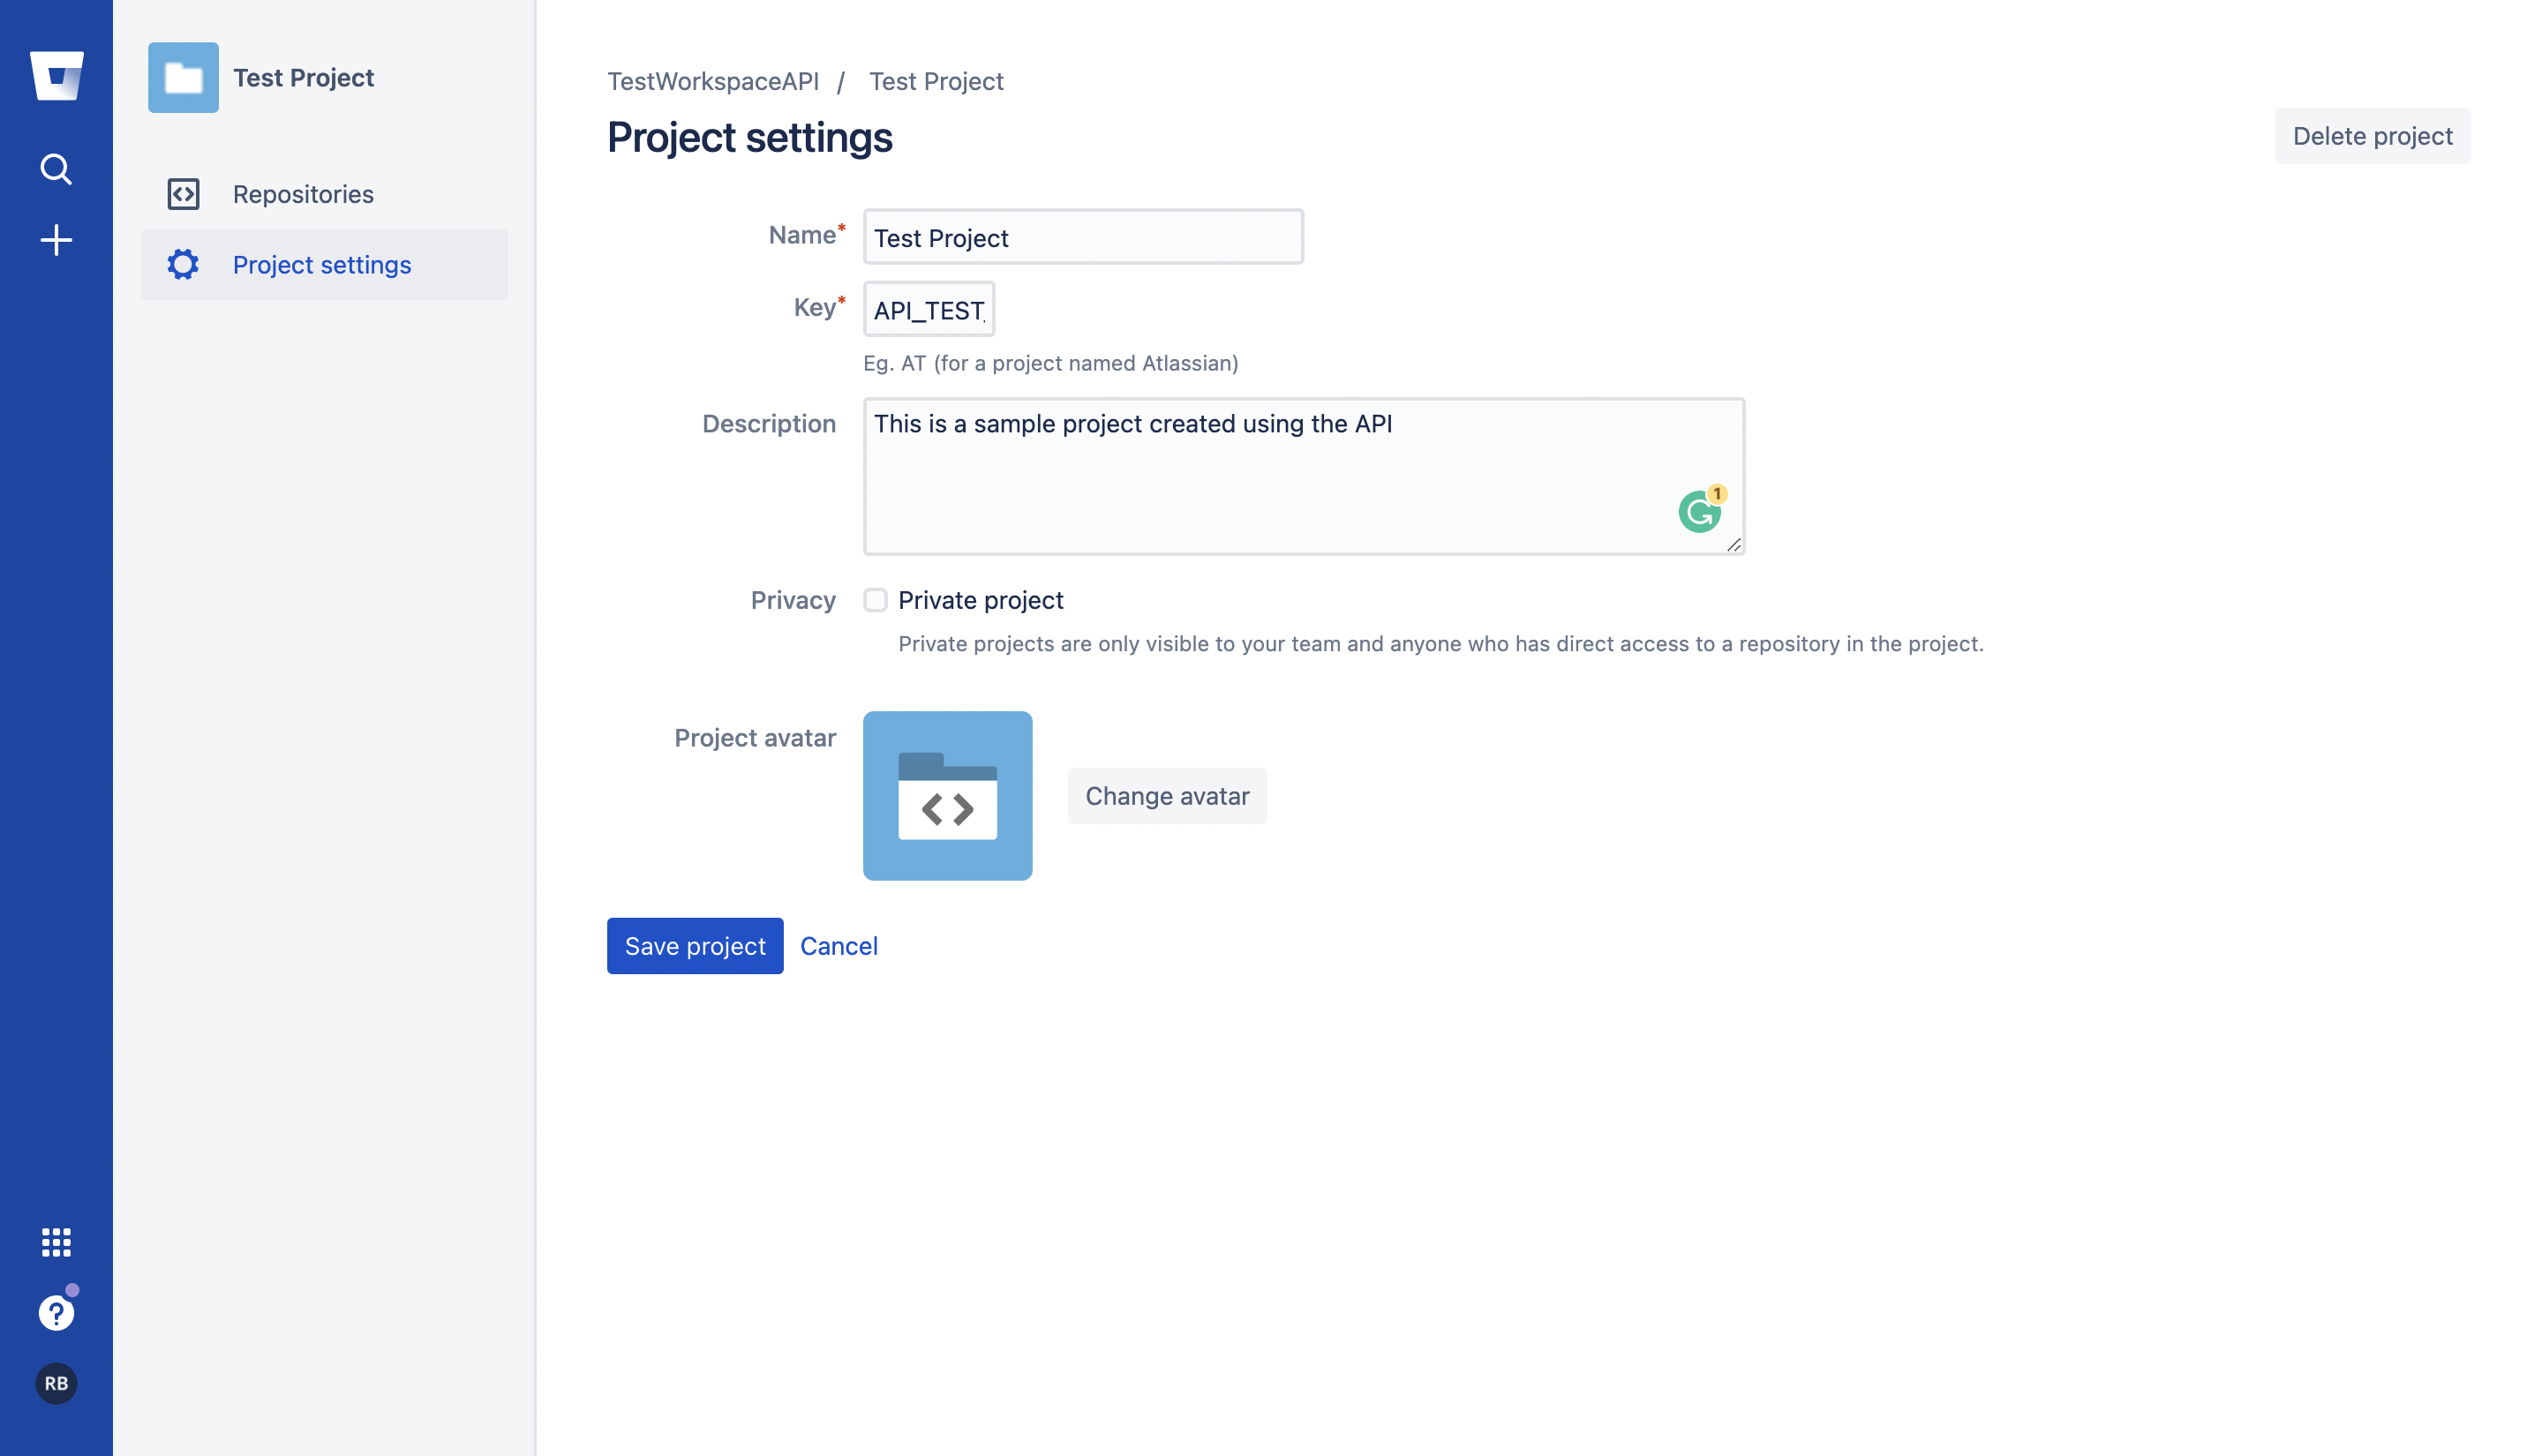 Screenshot showing the new project created through the Bitbucket API.